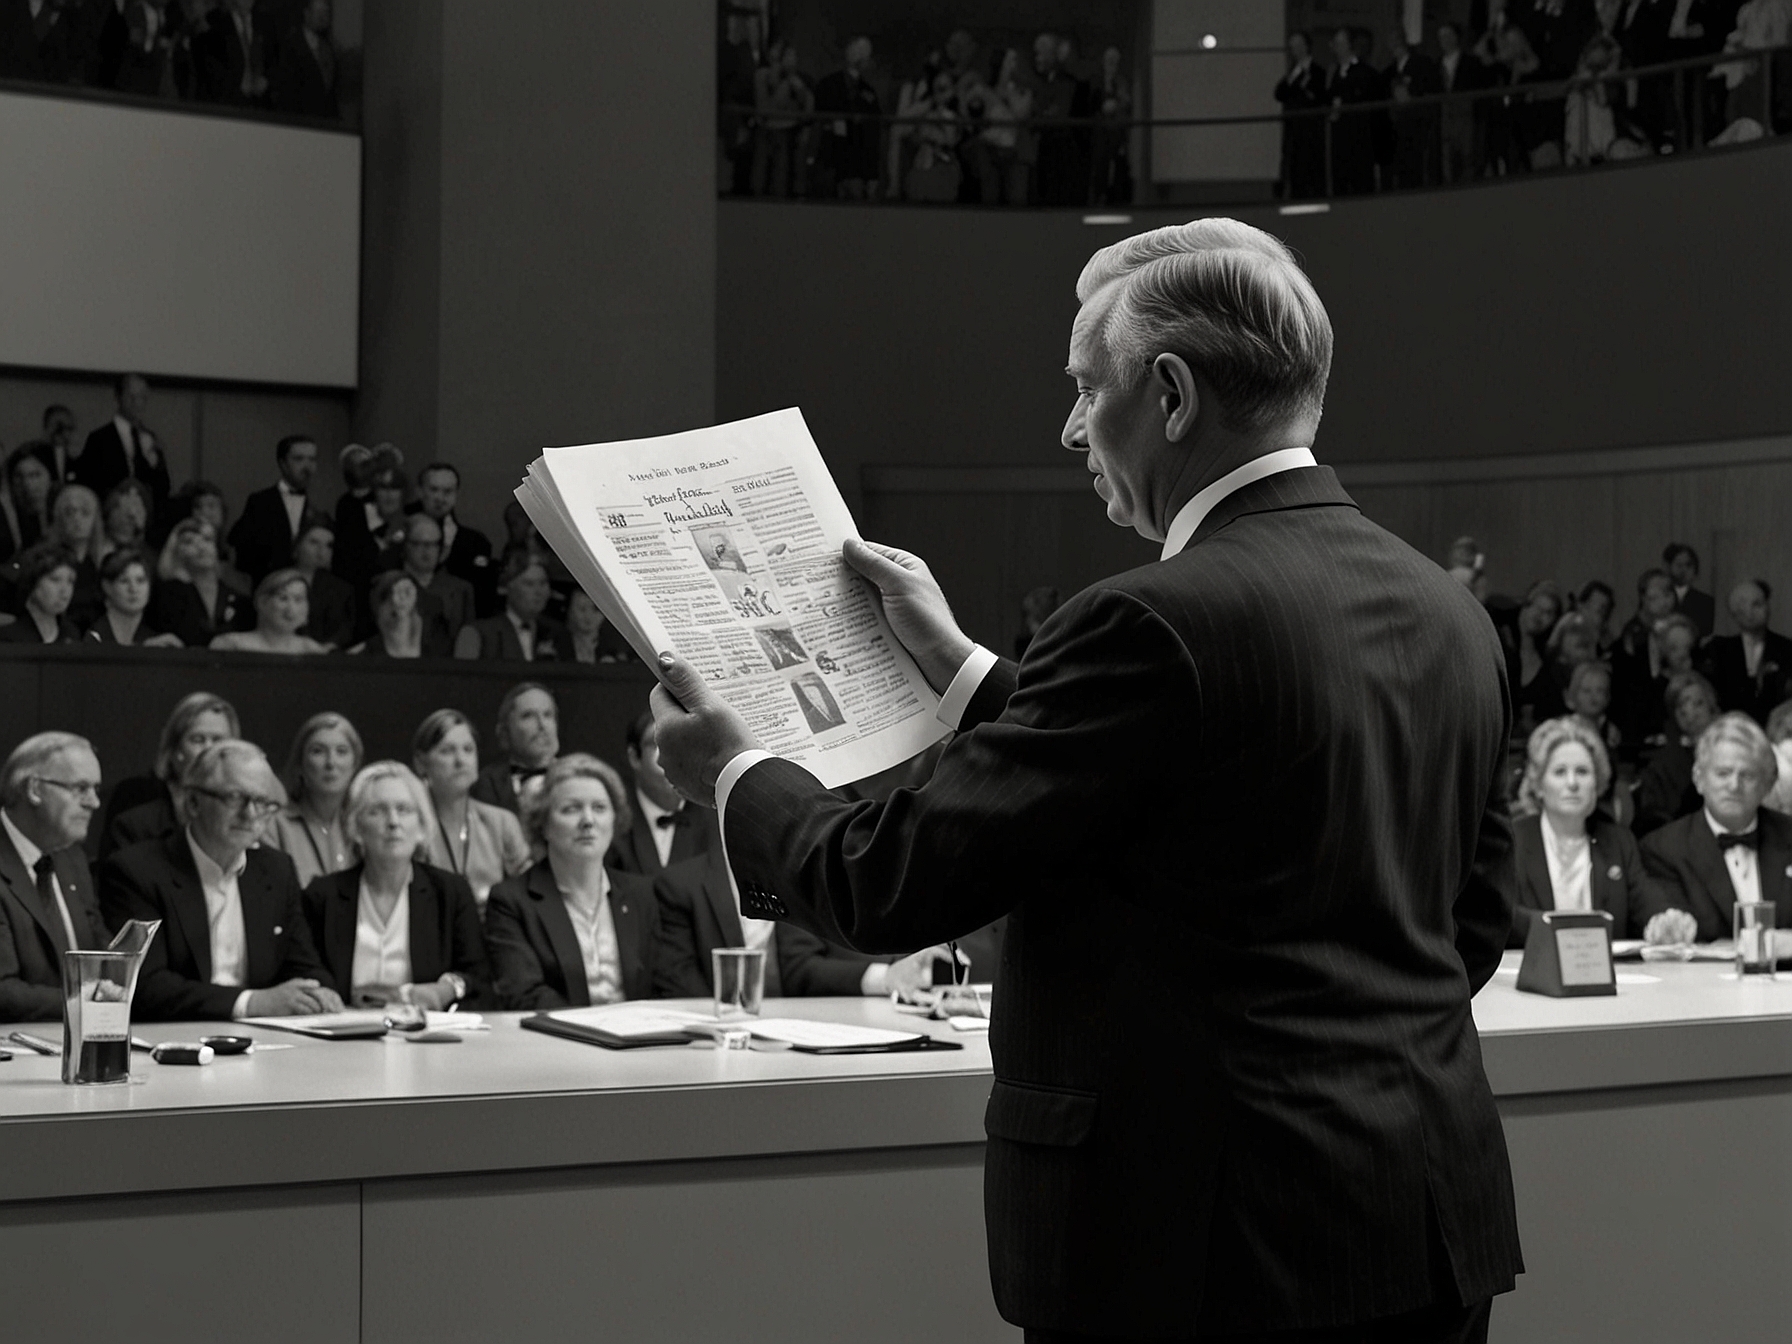 A dramatic shot of an auctioneer at Bonhams holding up the rare proof copy, highlighting its significance and expected high bids.